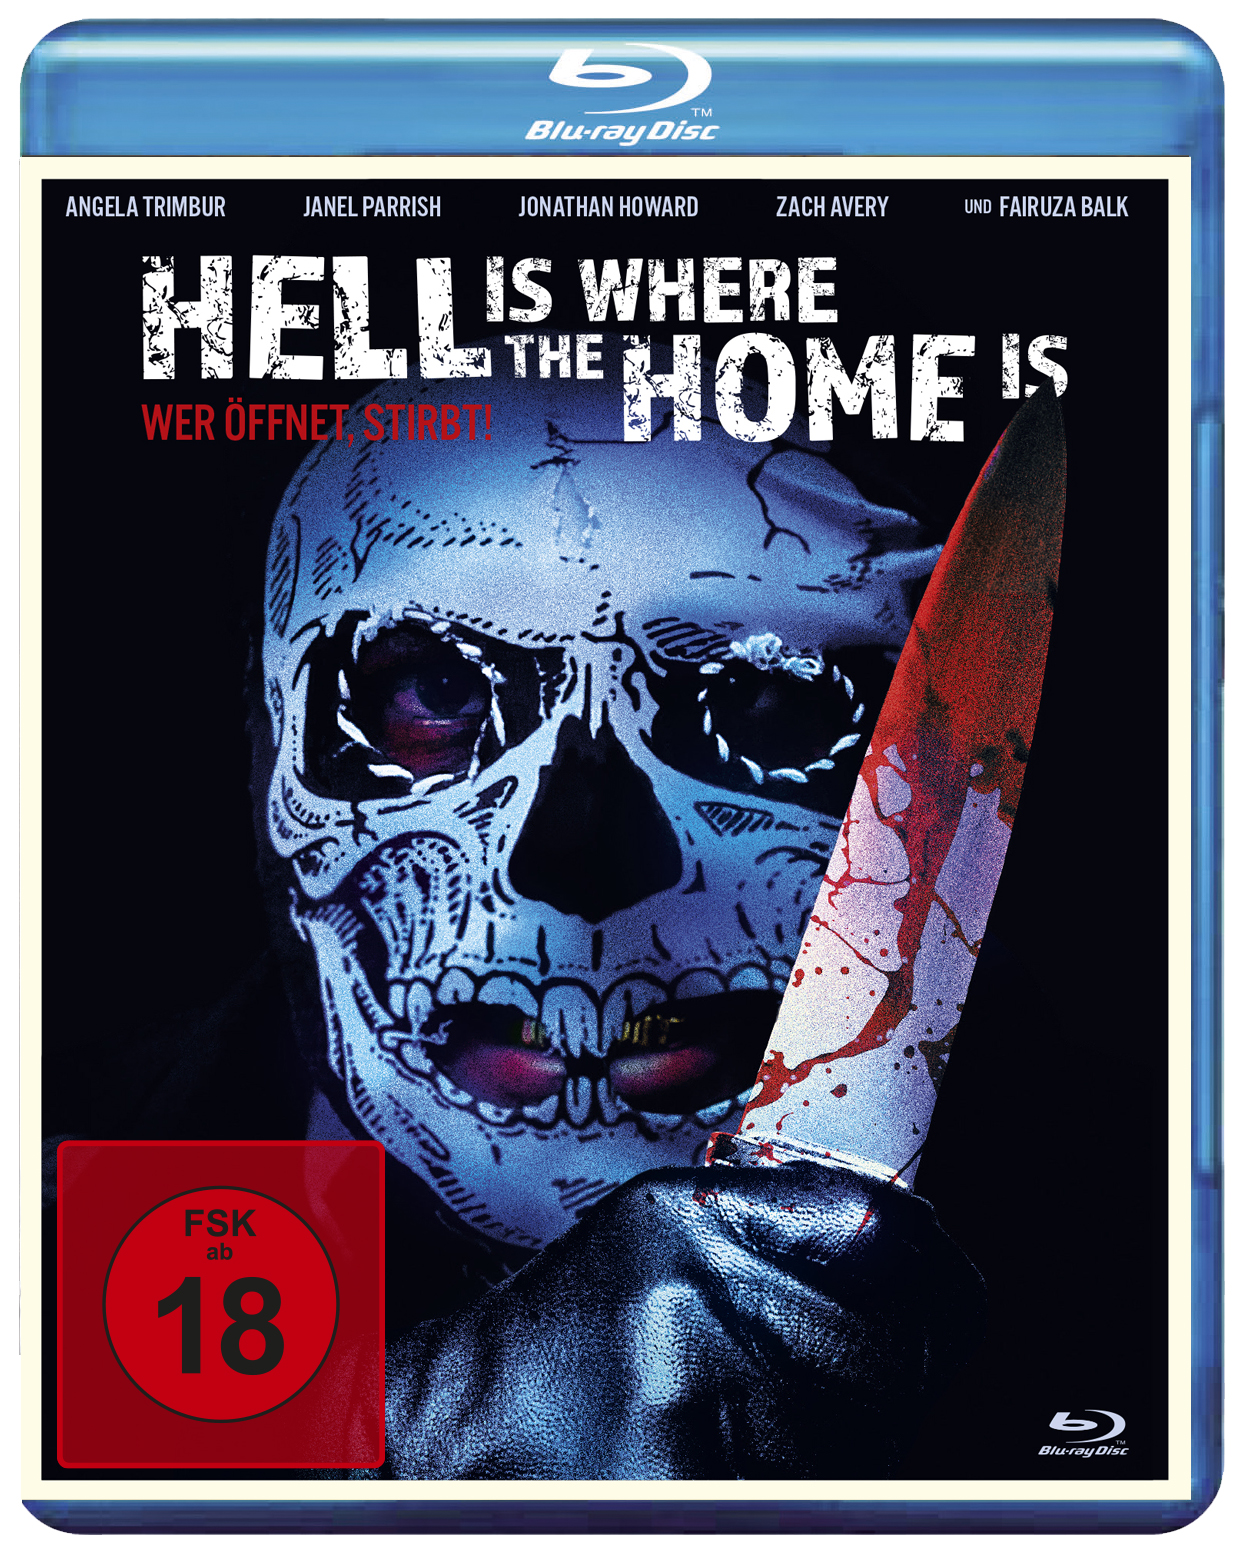 Hell Is Where The Home Is (uncut)